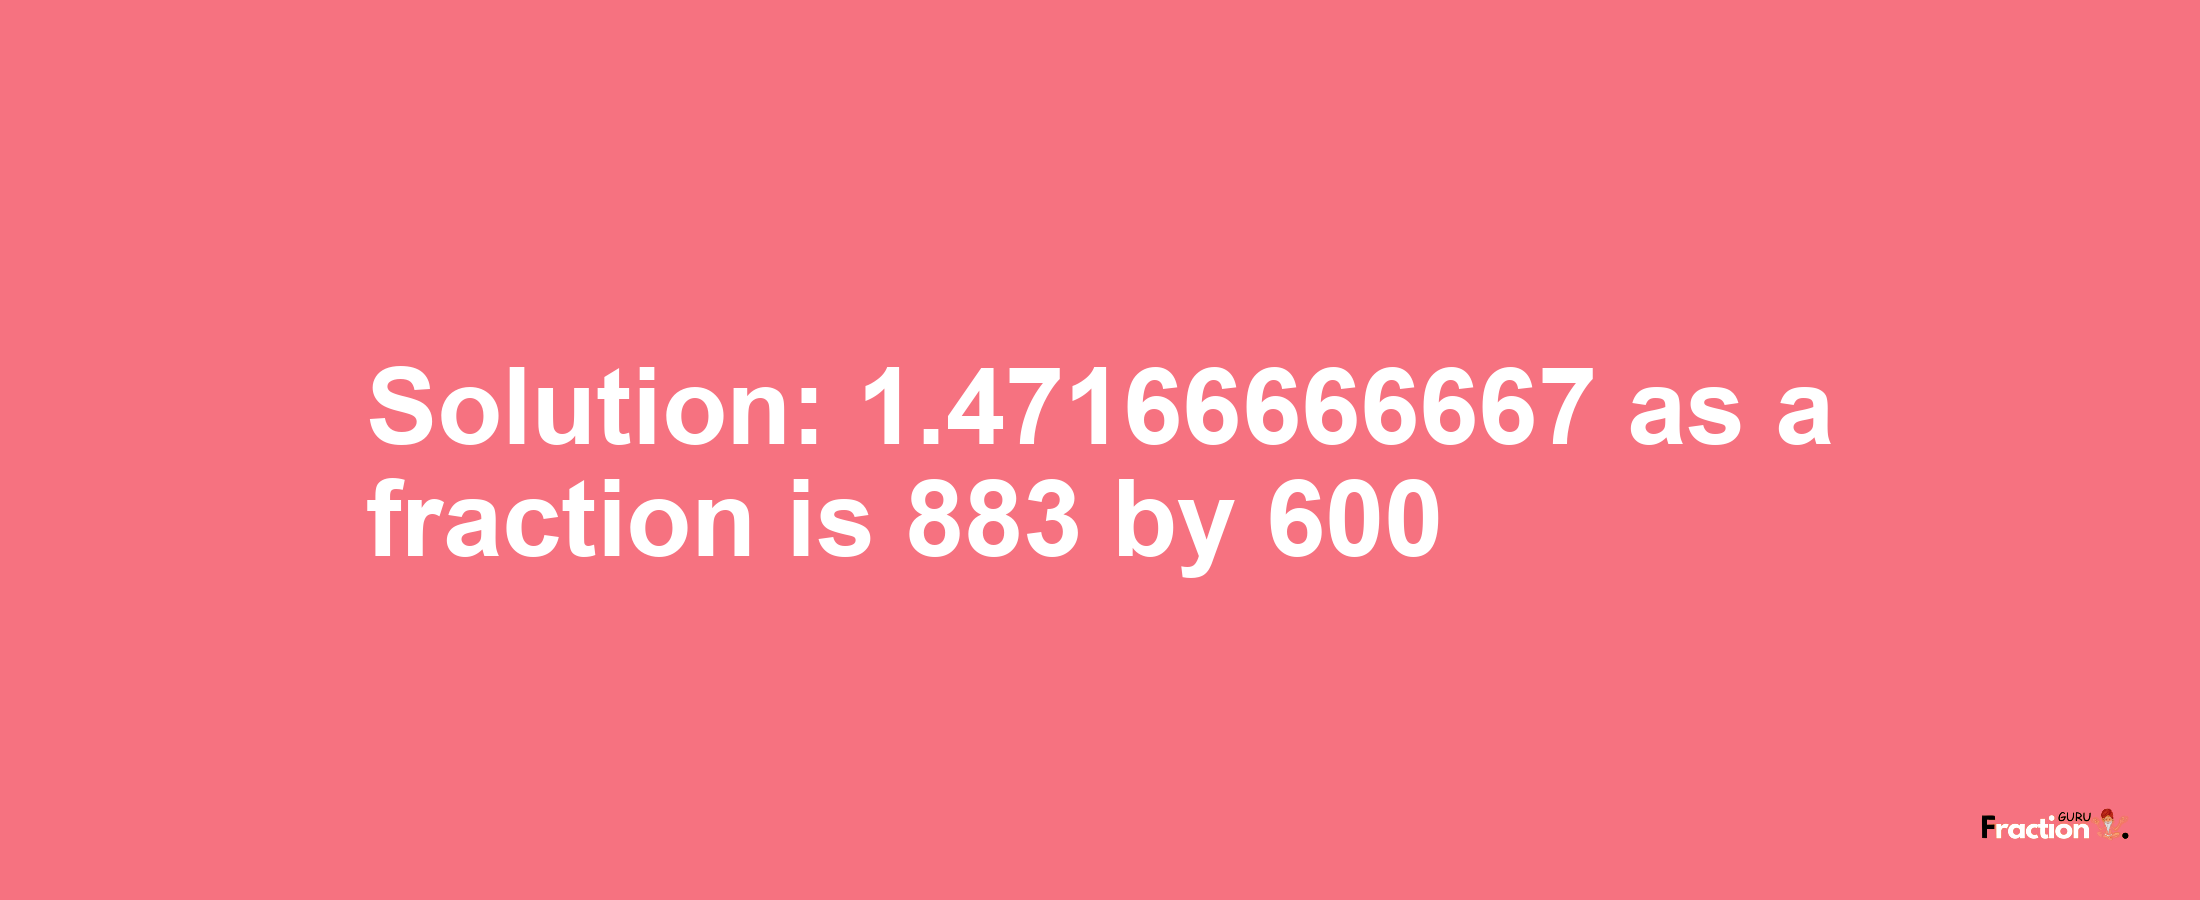 Solution:1.47166666667 as a fraction is 883/600